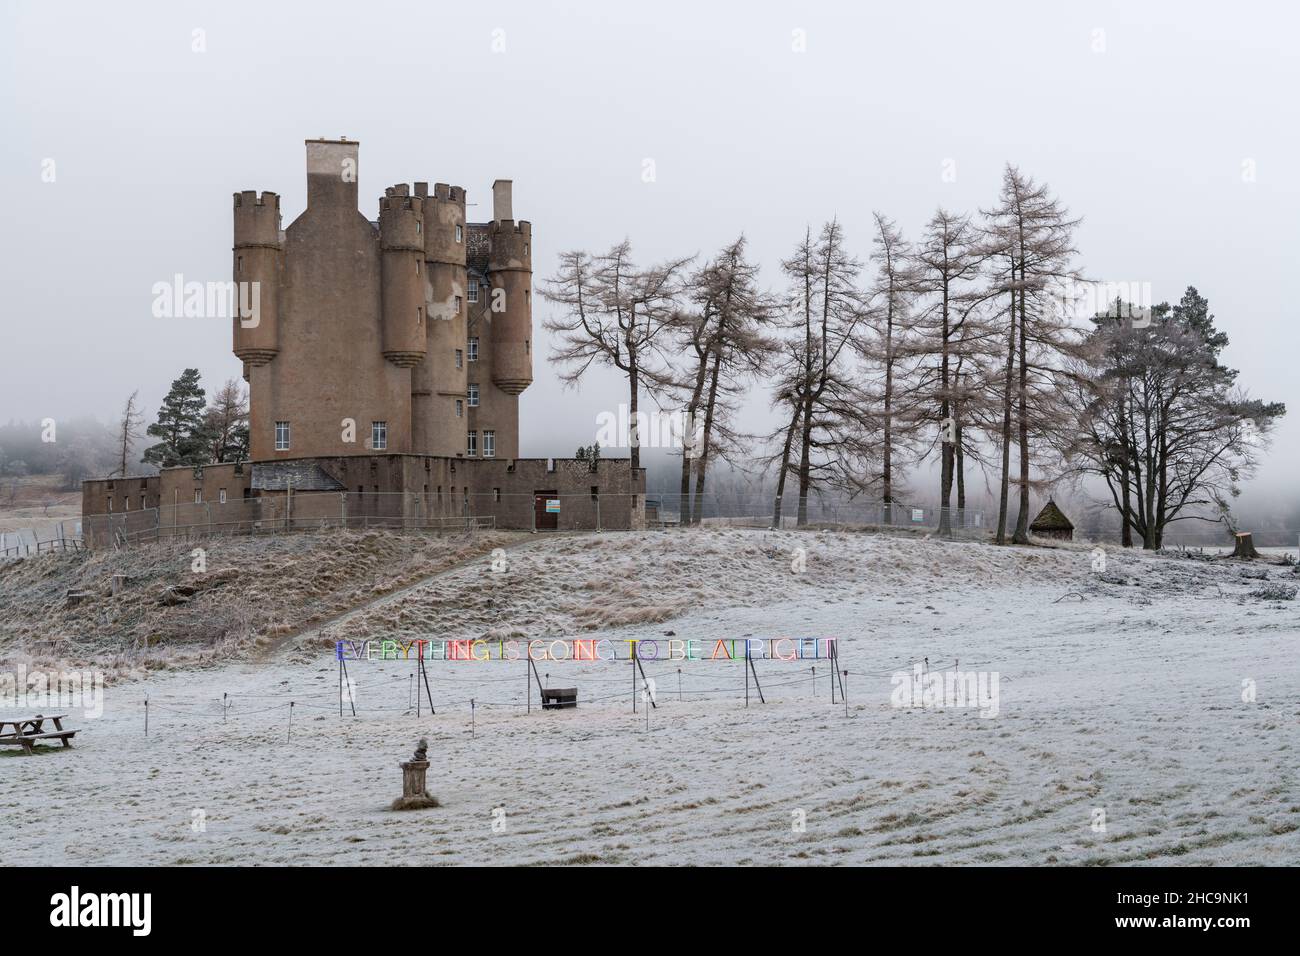 The Piece of Contemporary Neon Art at Braemar Castle Provides an Uplifting, Multicoloured Message of Hope in Contrast to the Austere, Wintery Setting Stock Photo